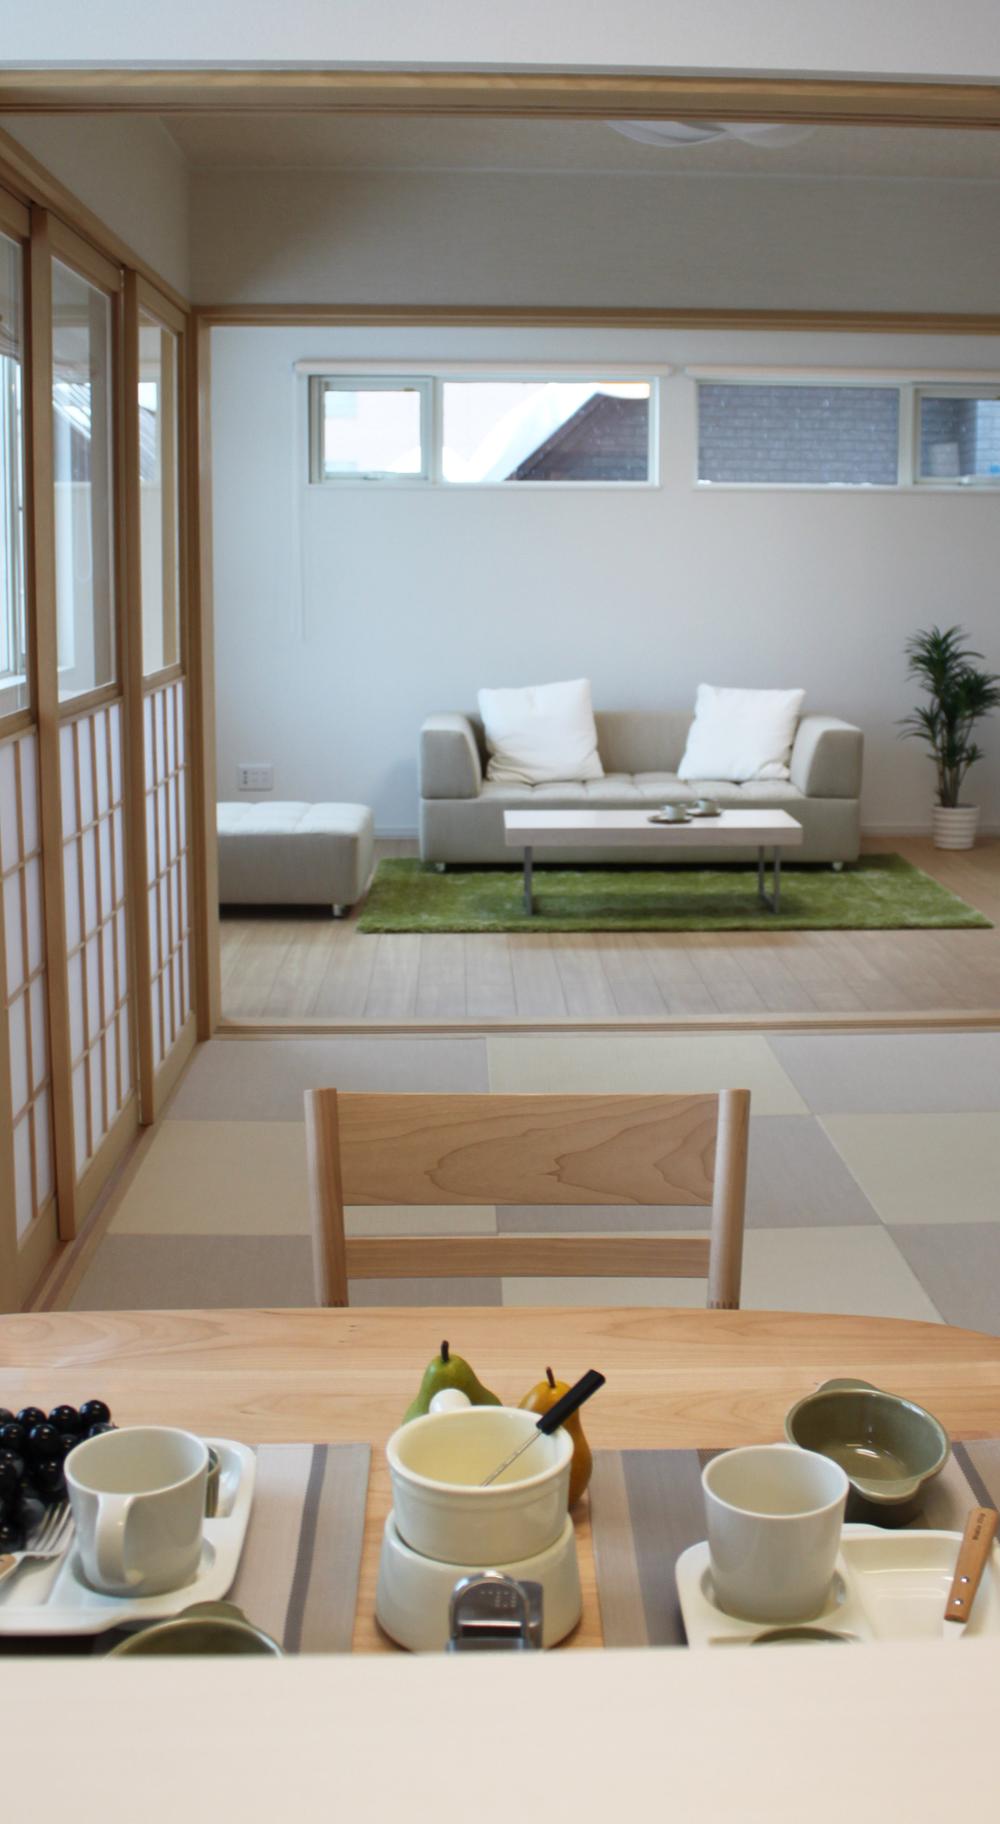 Non-living room. Modern style of Japanese-style room provided between the living and dining.